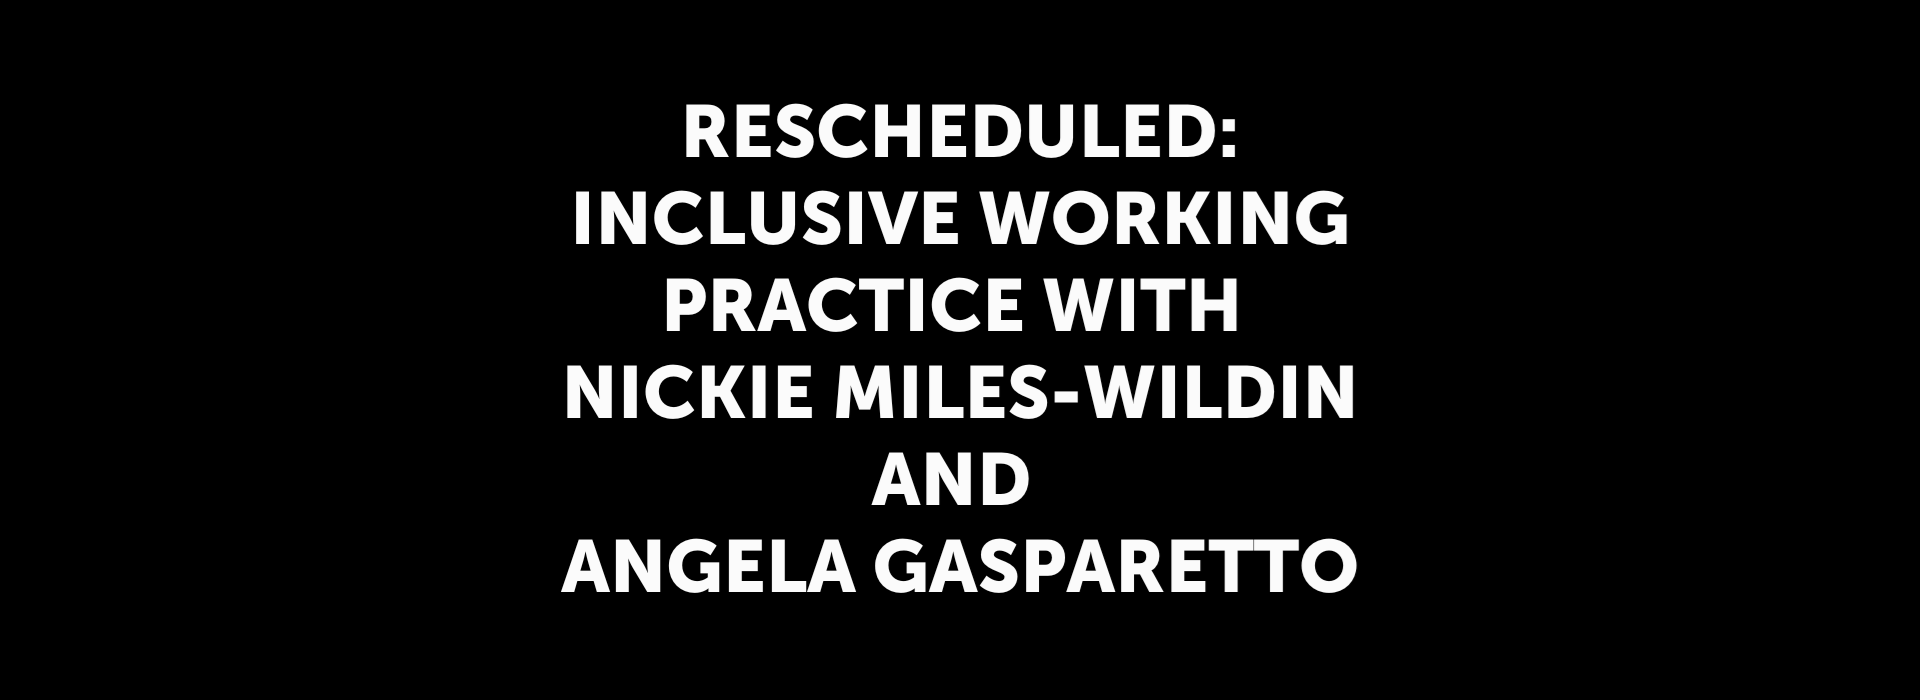 RESCHEDULED: Inclusive Working Practice with Nickie Miles-Wildin and Angela Gasparetto